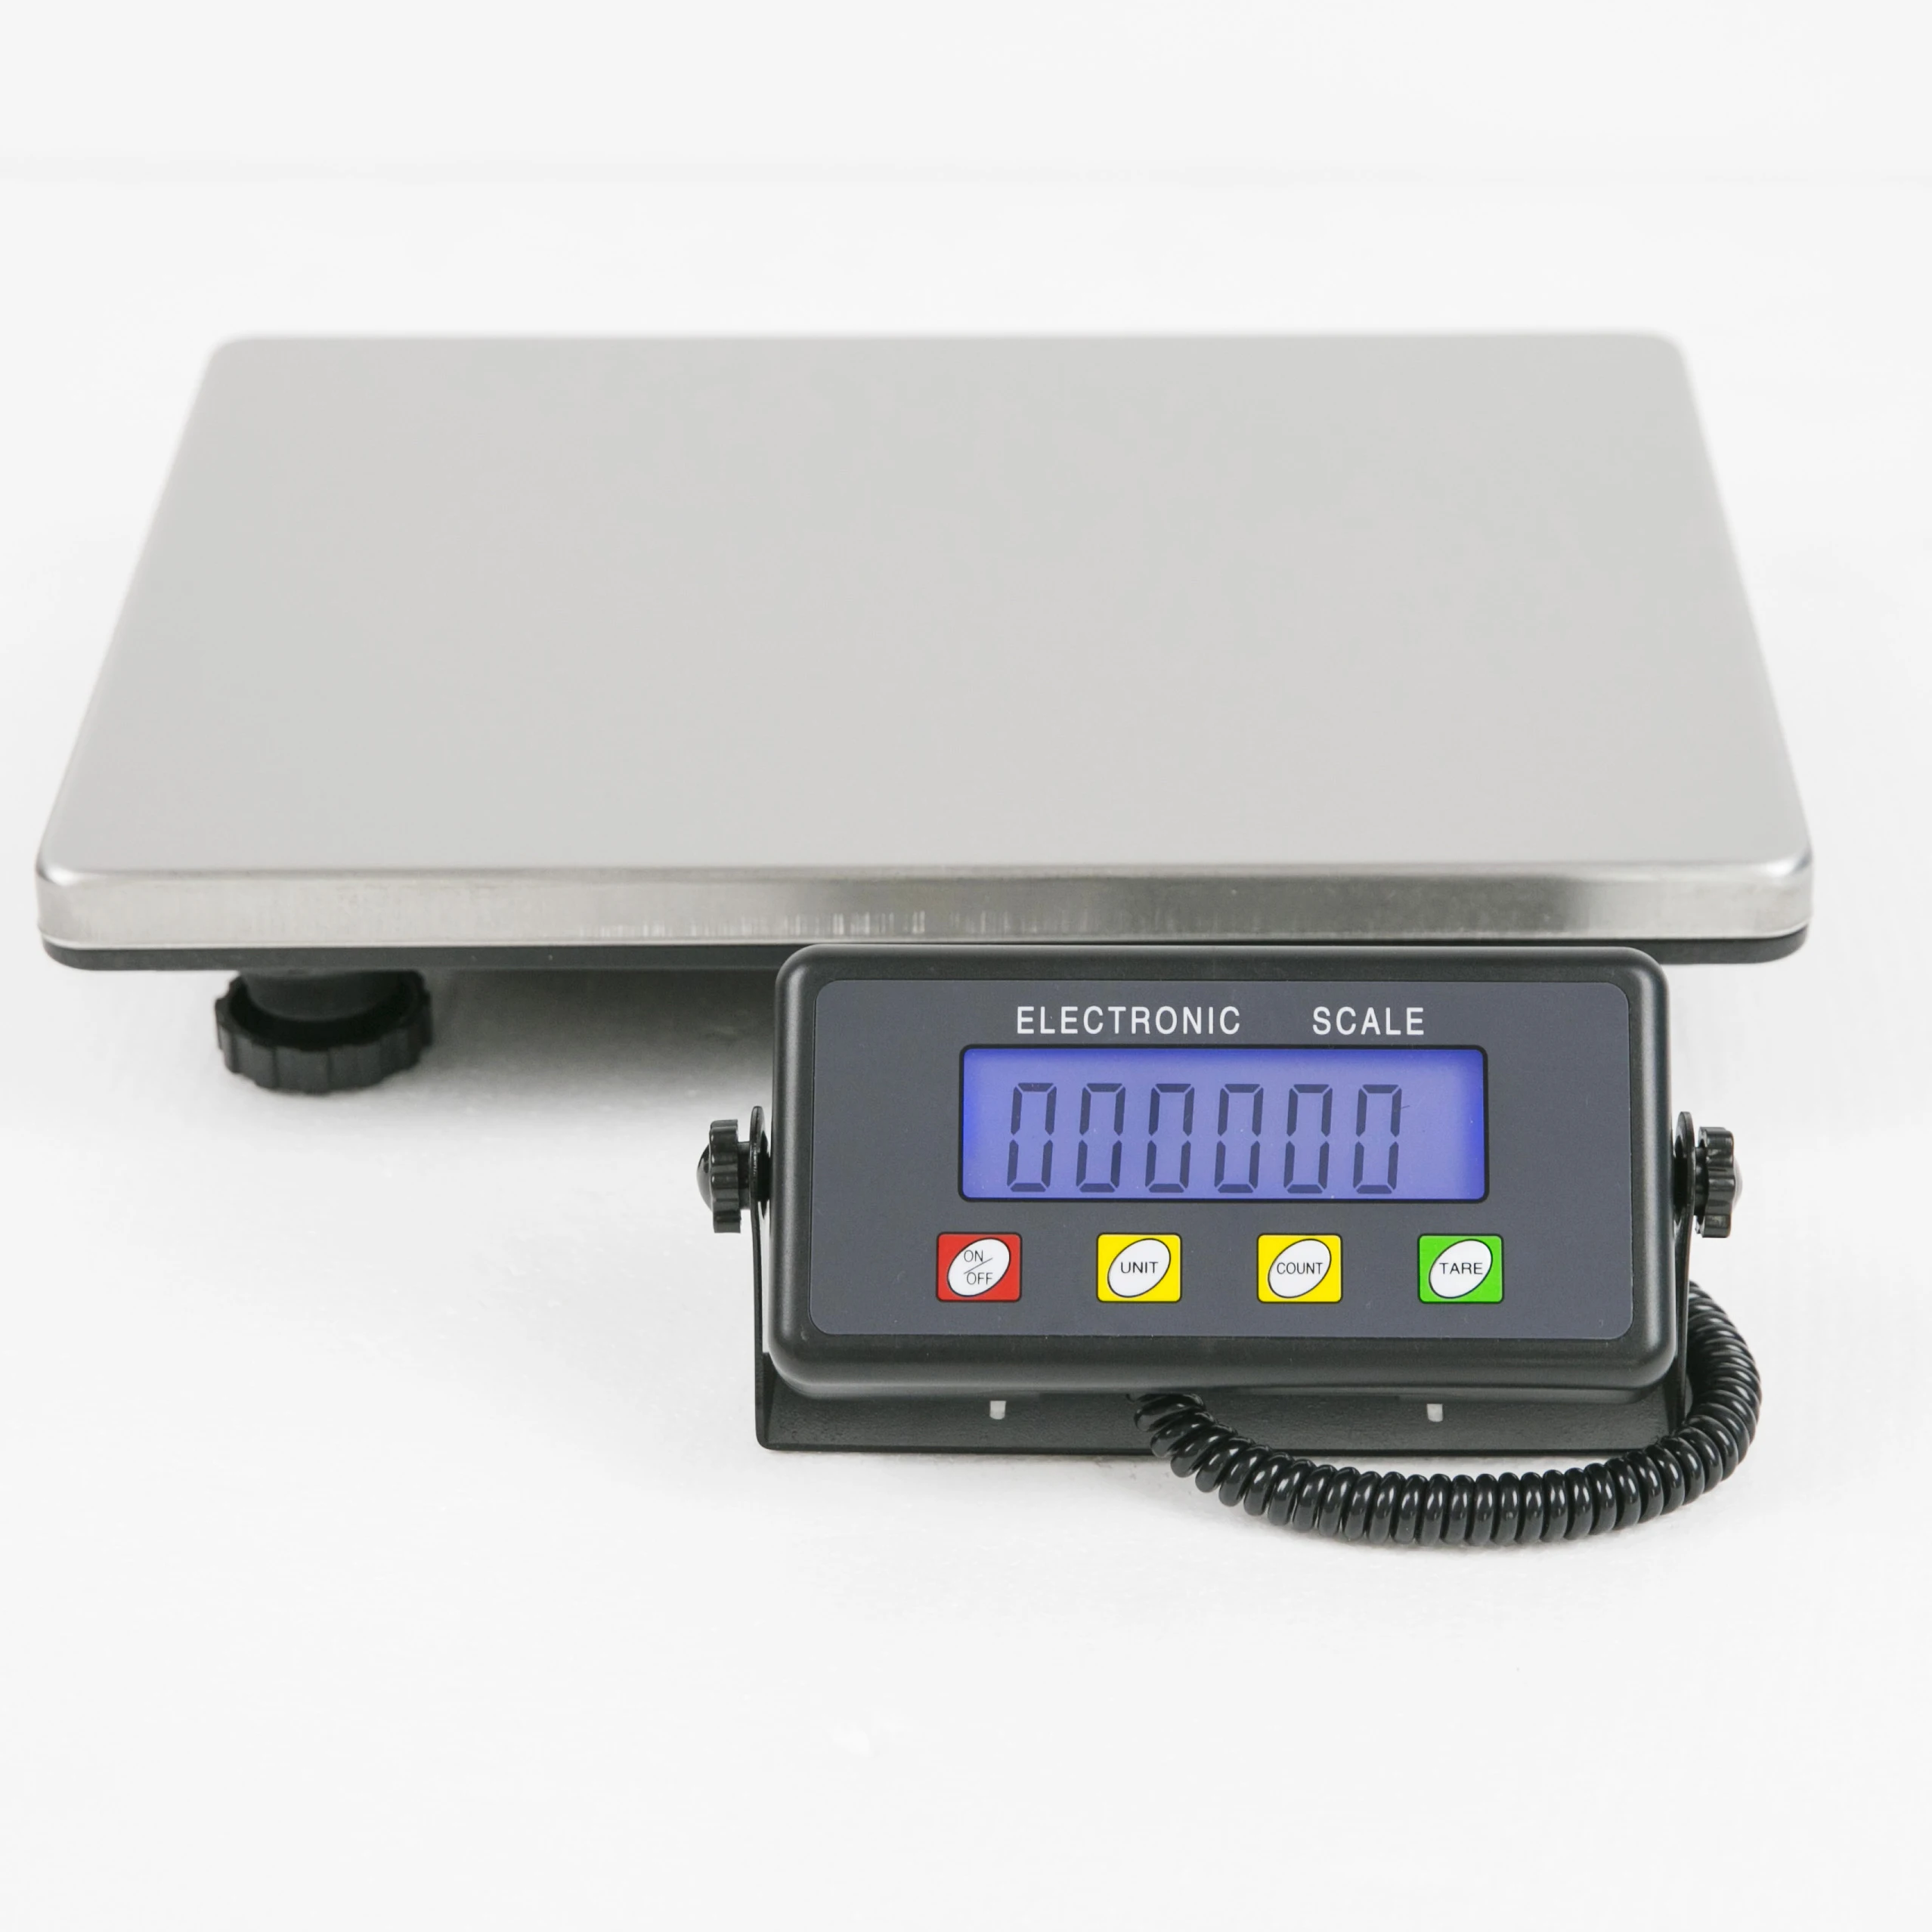 

Industrial Heavy Duty Digital Shipping Postal Scale Parcel Office Bench Scale Large Platform 200kg/660lb LCD w/ AC Adapter